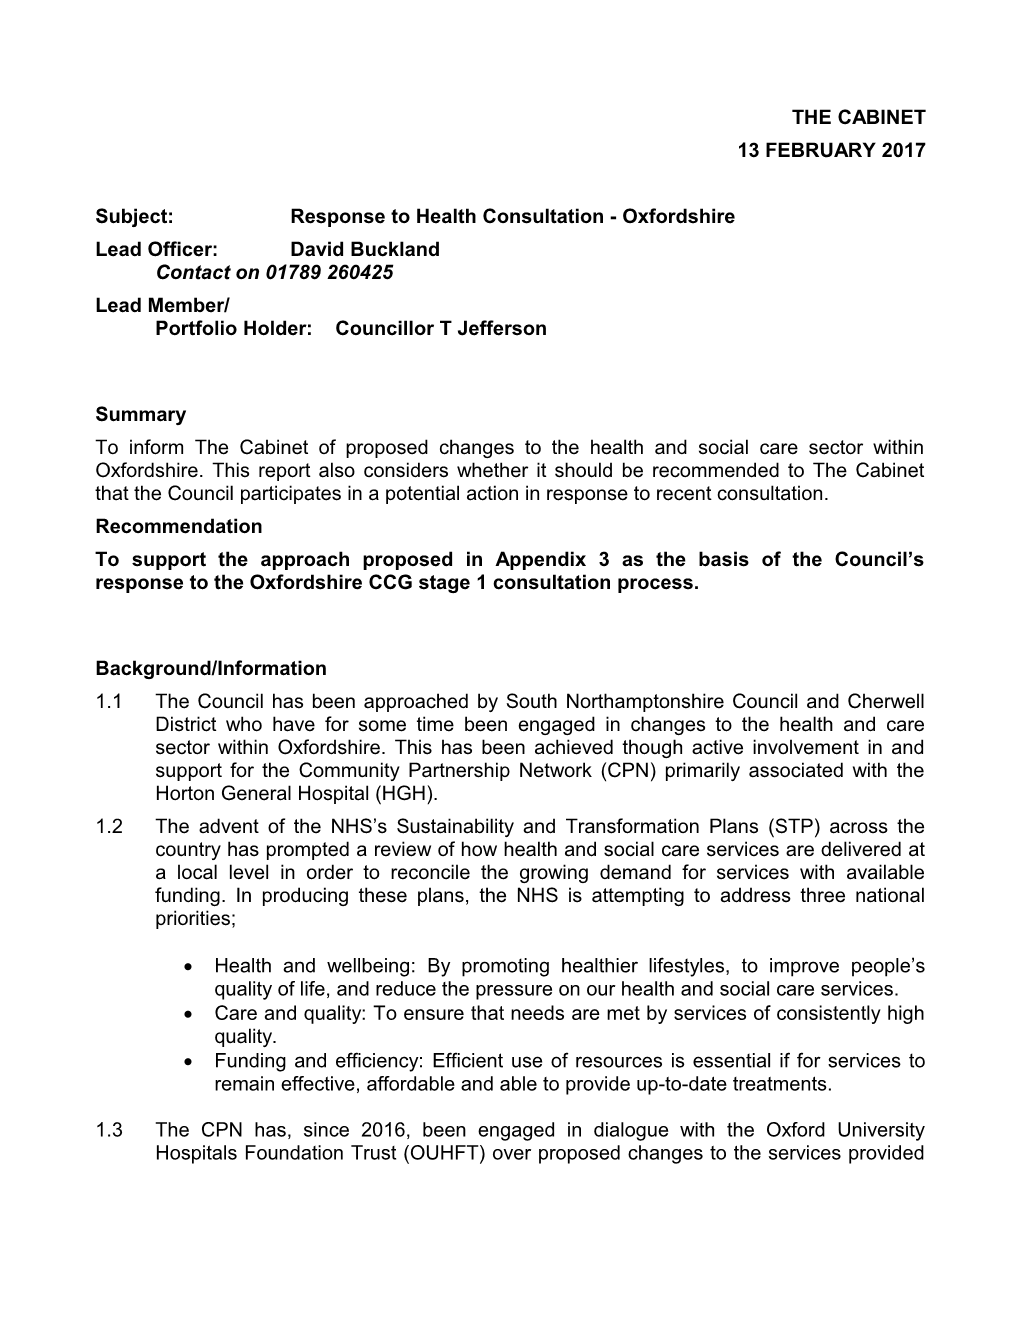 Subject:Response to Health Consultation - Oxfordshire